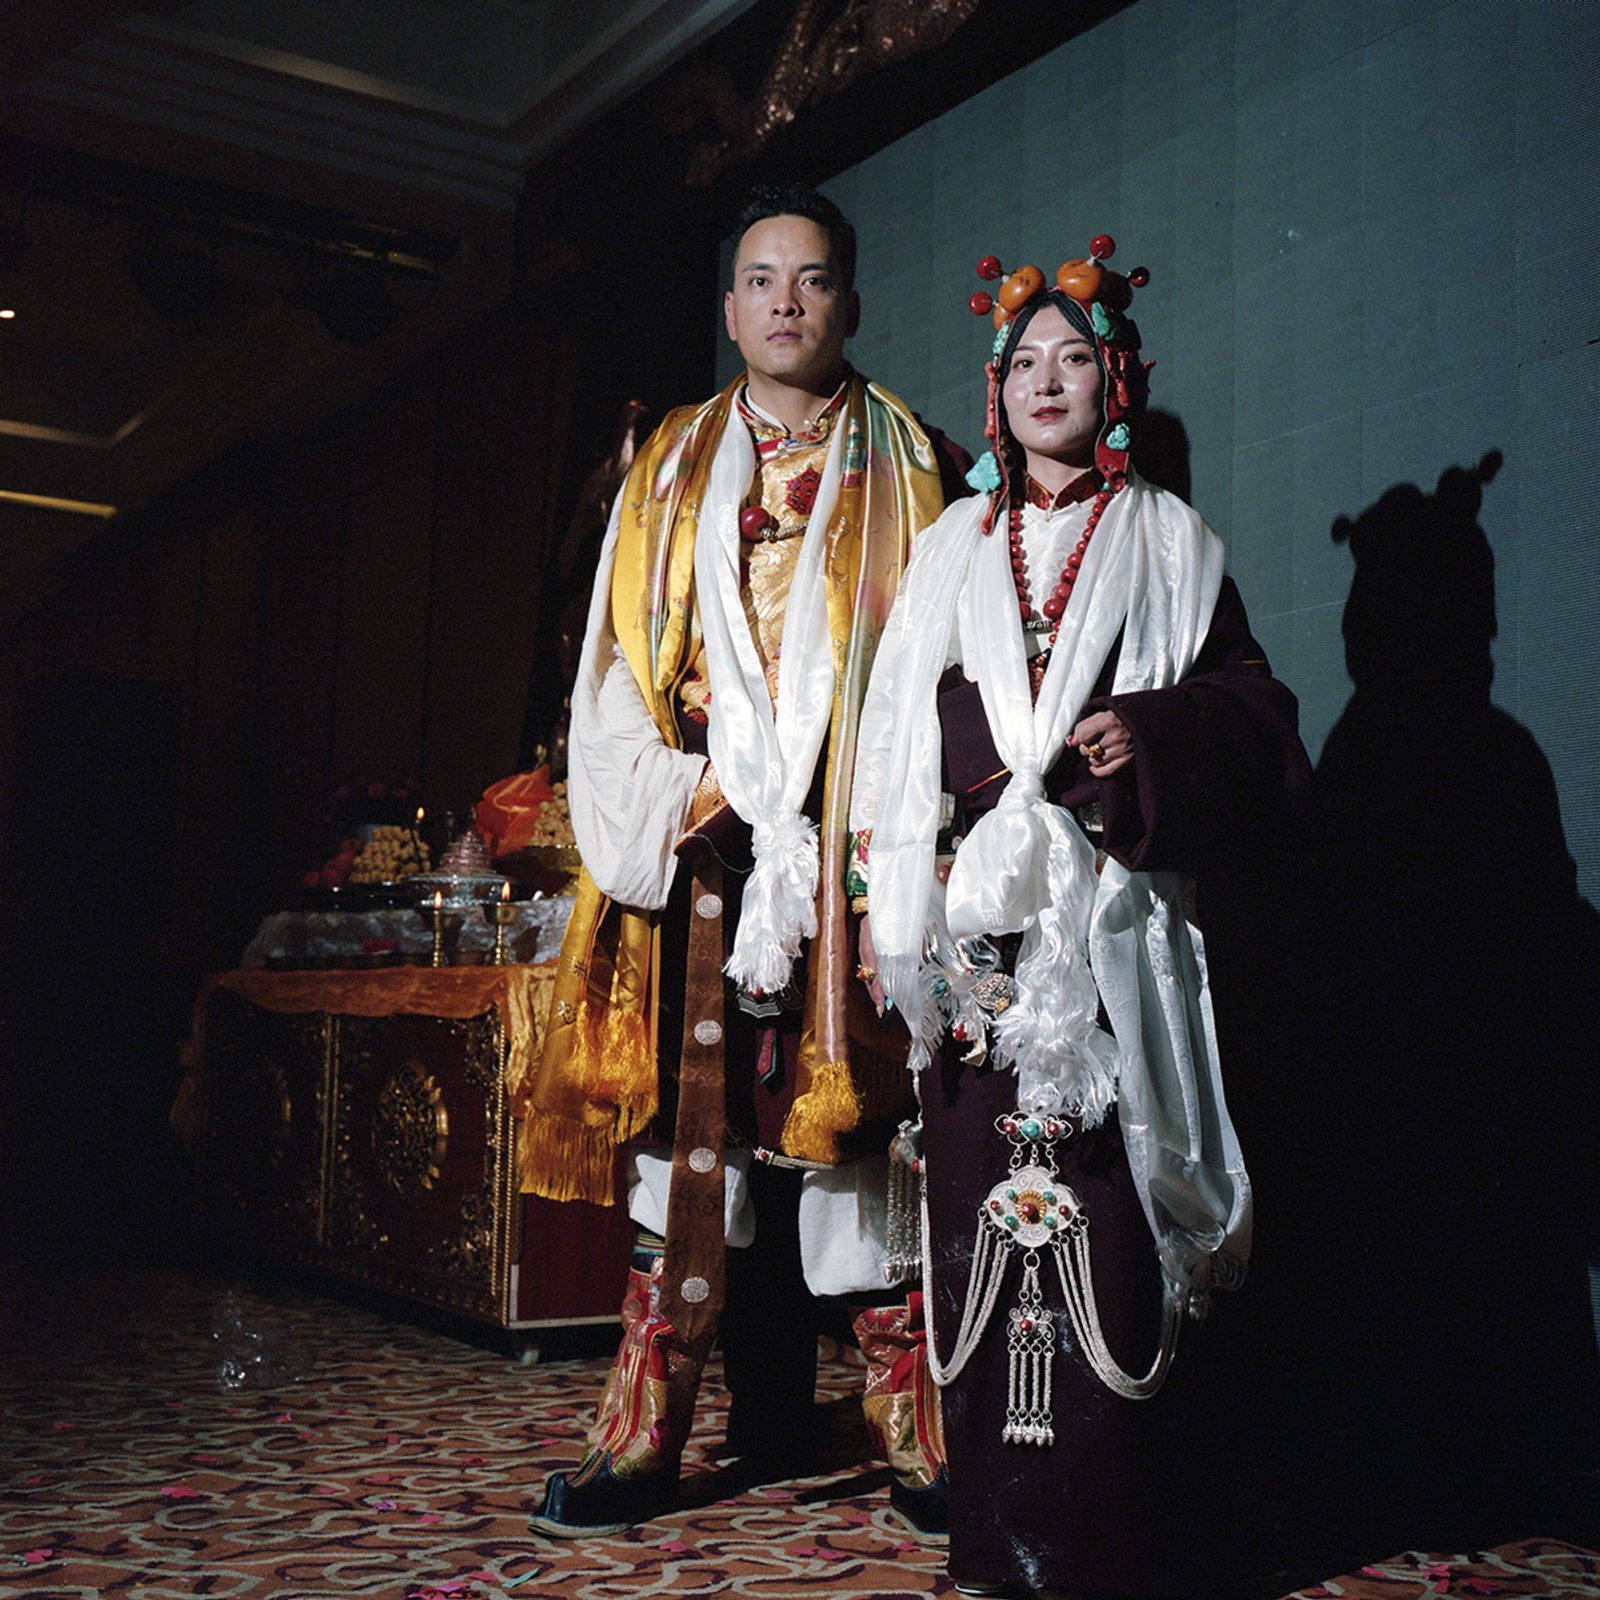 © Hao Wu - Image from the Gesar - From Heroic Land to Tibetan Odyssey of Modernization photography project